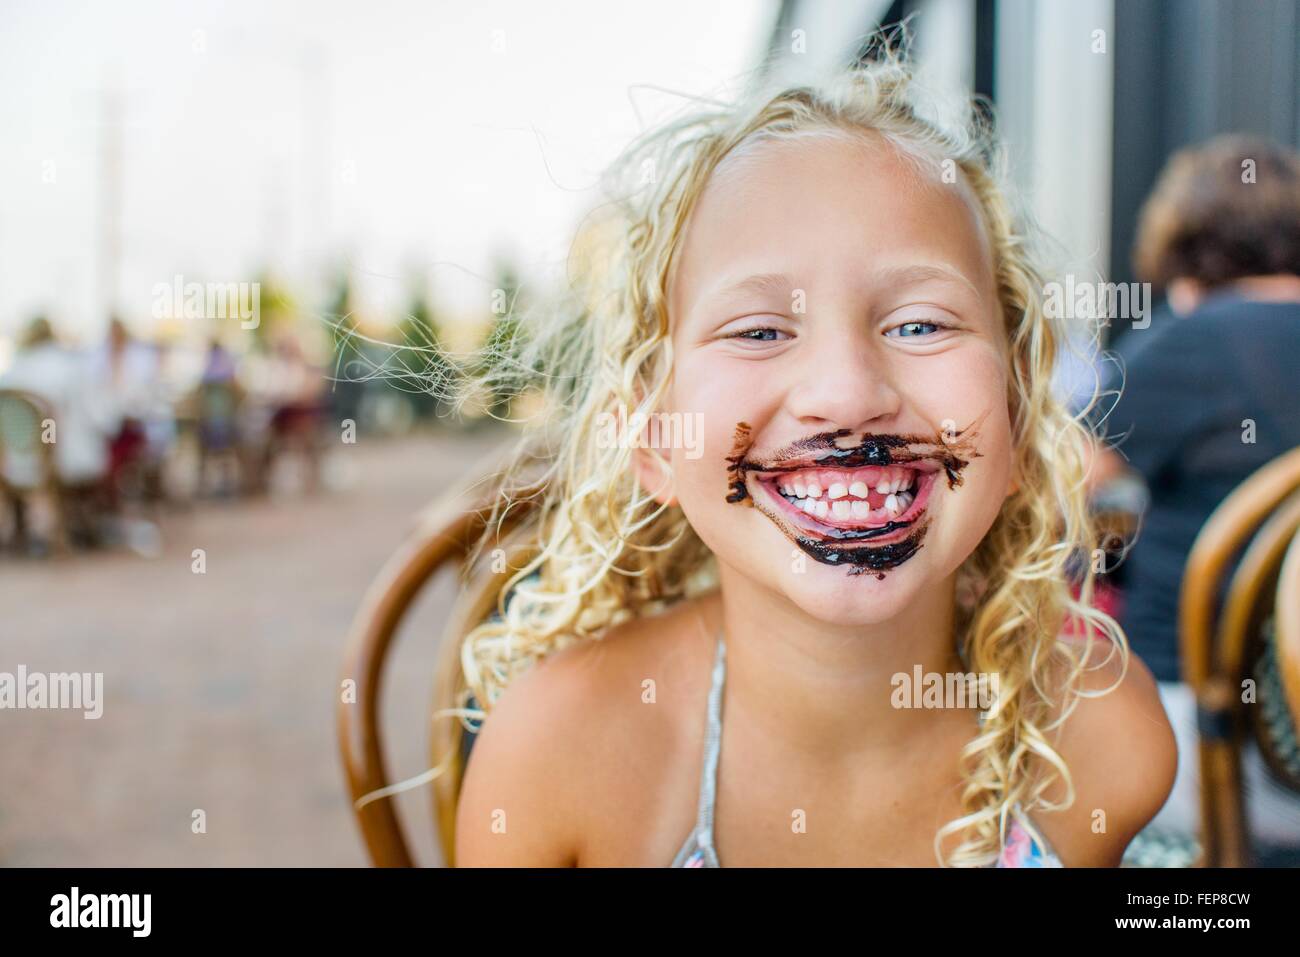 Portrait of blond haired girl at sidewalk cafe with sauce covered mouth Stock Photo